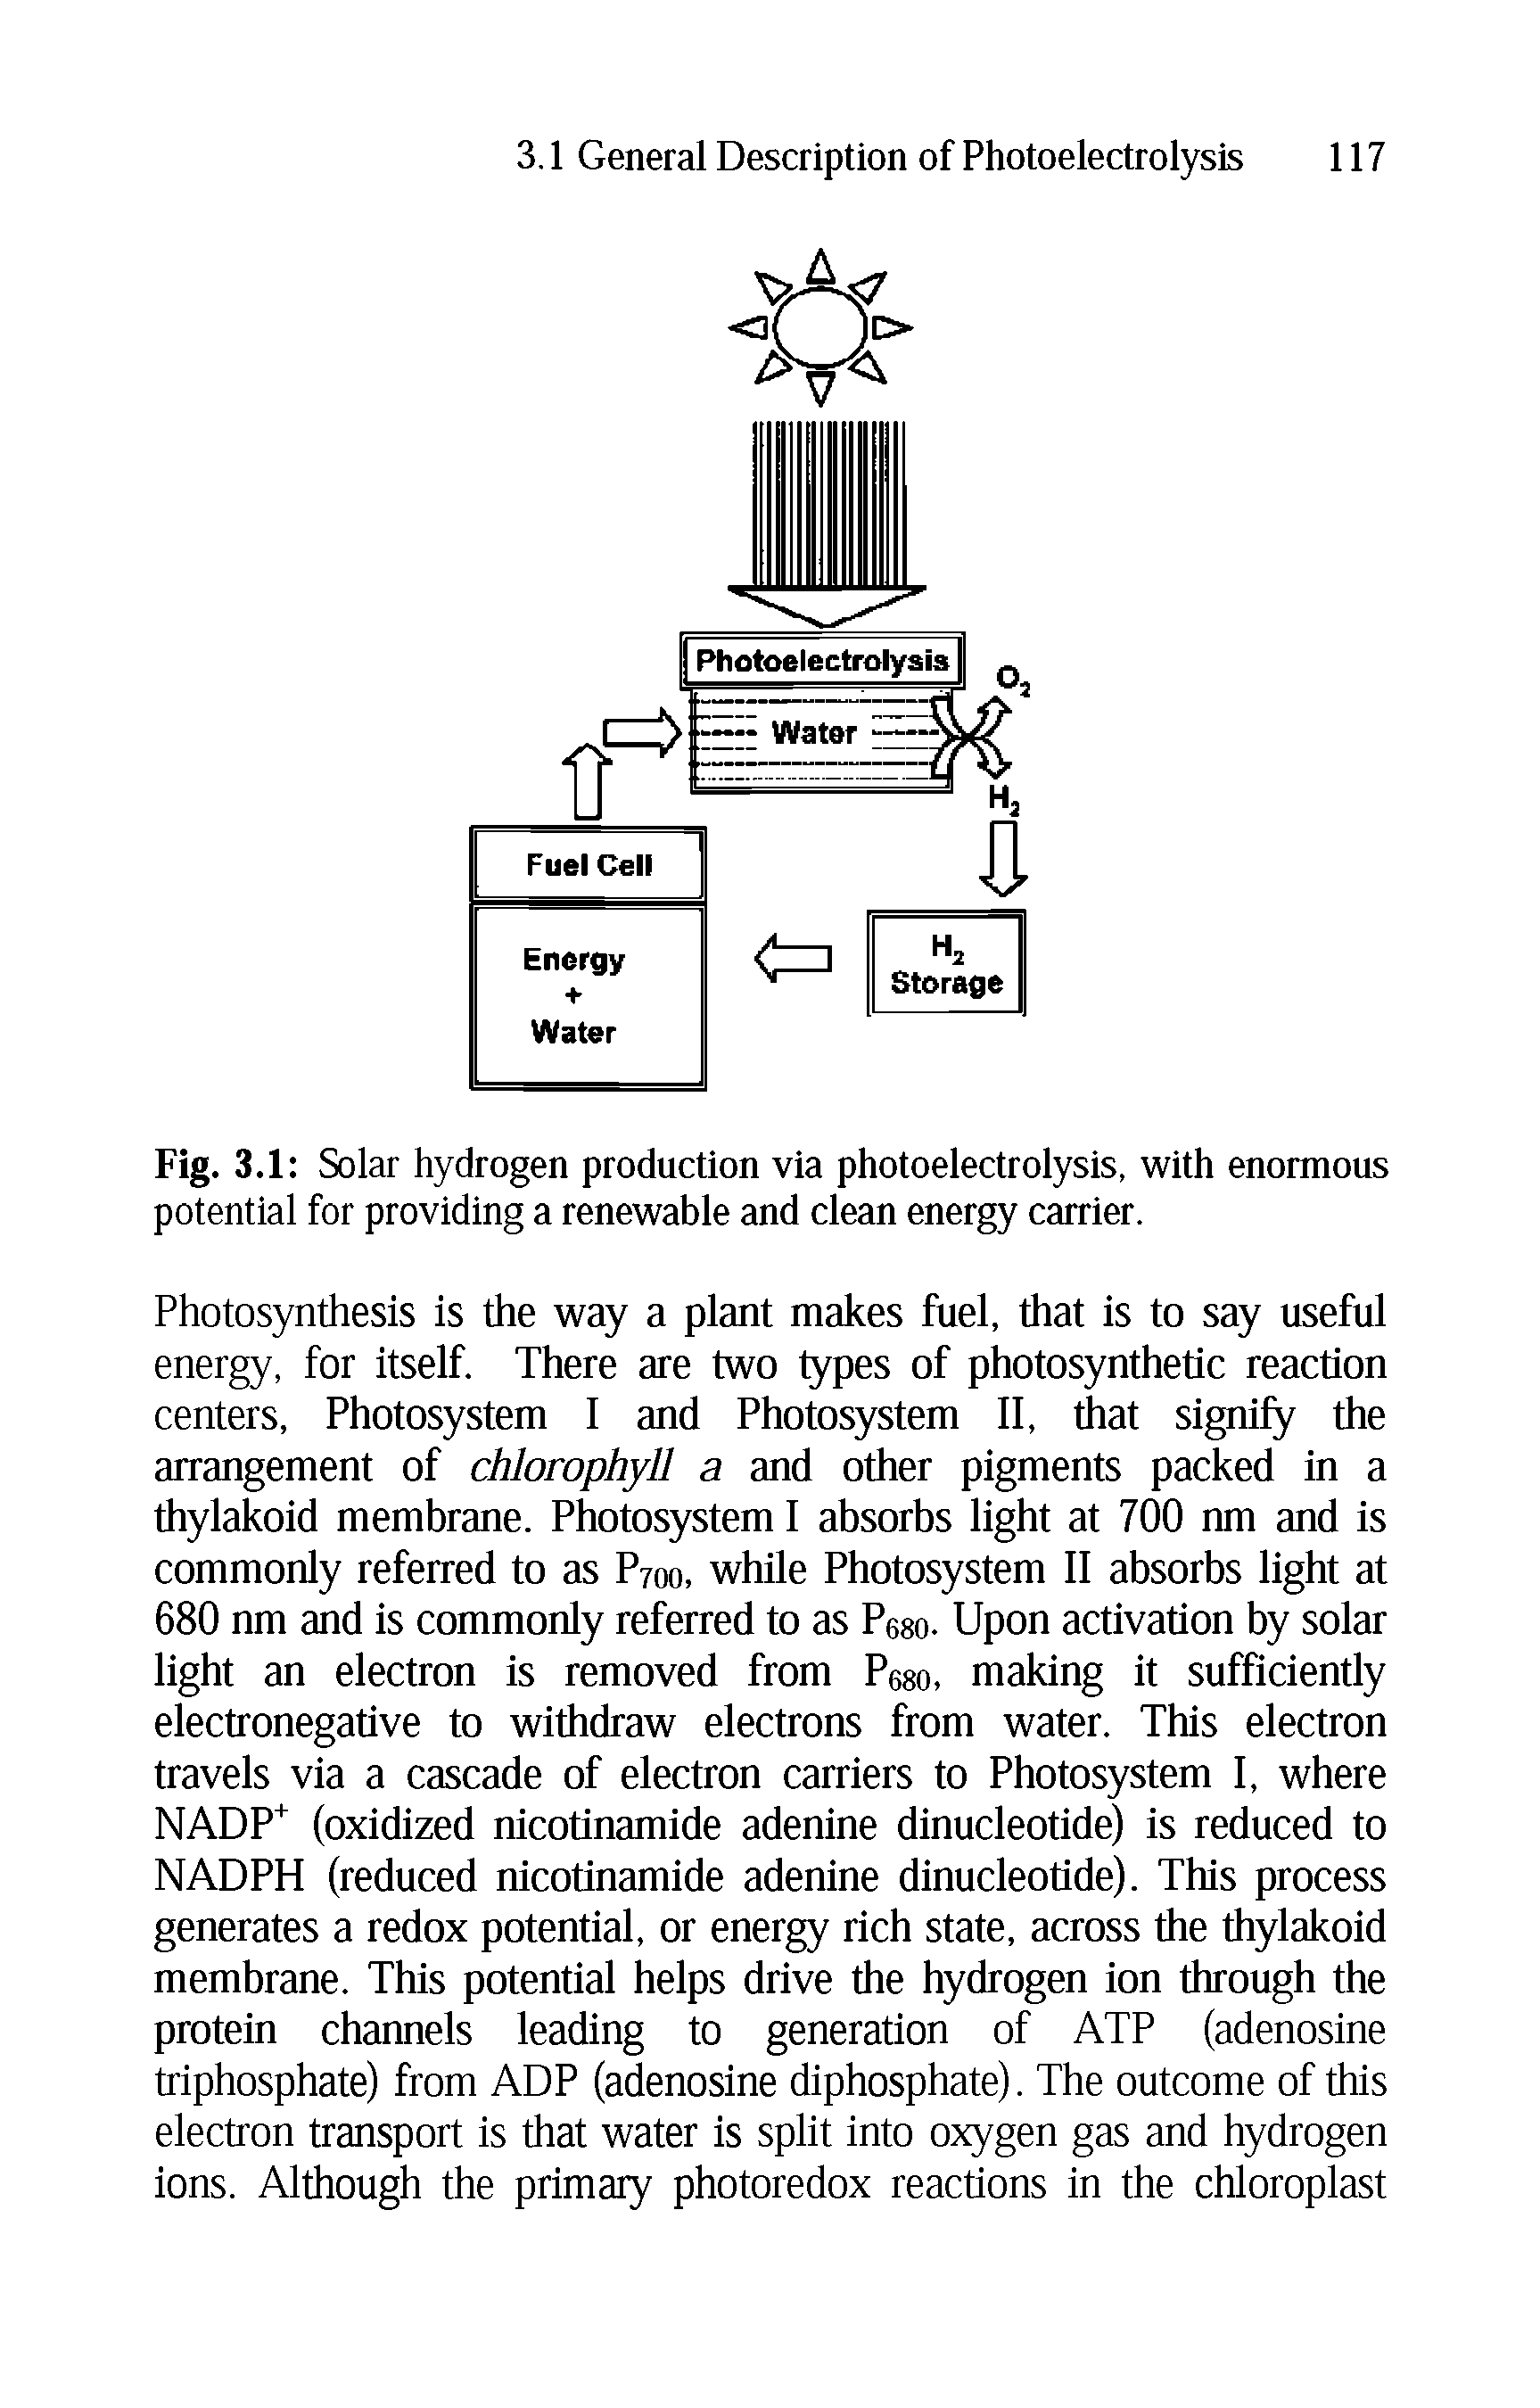 Fig. 3.1 Solar hydrogen production via photoelectrolysis, with enormous potential for providing a renewable and clean energy carrier.